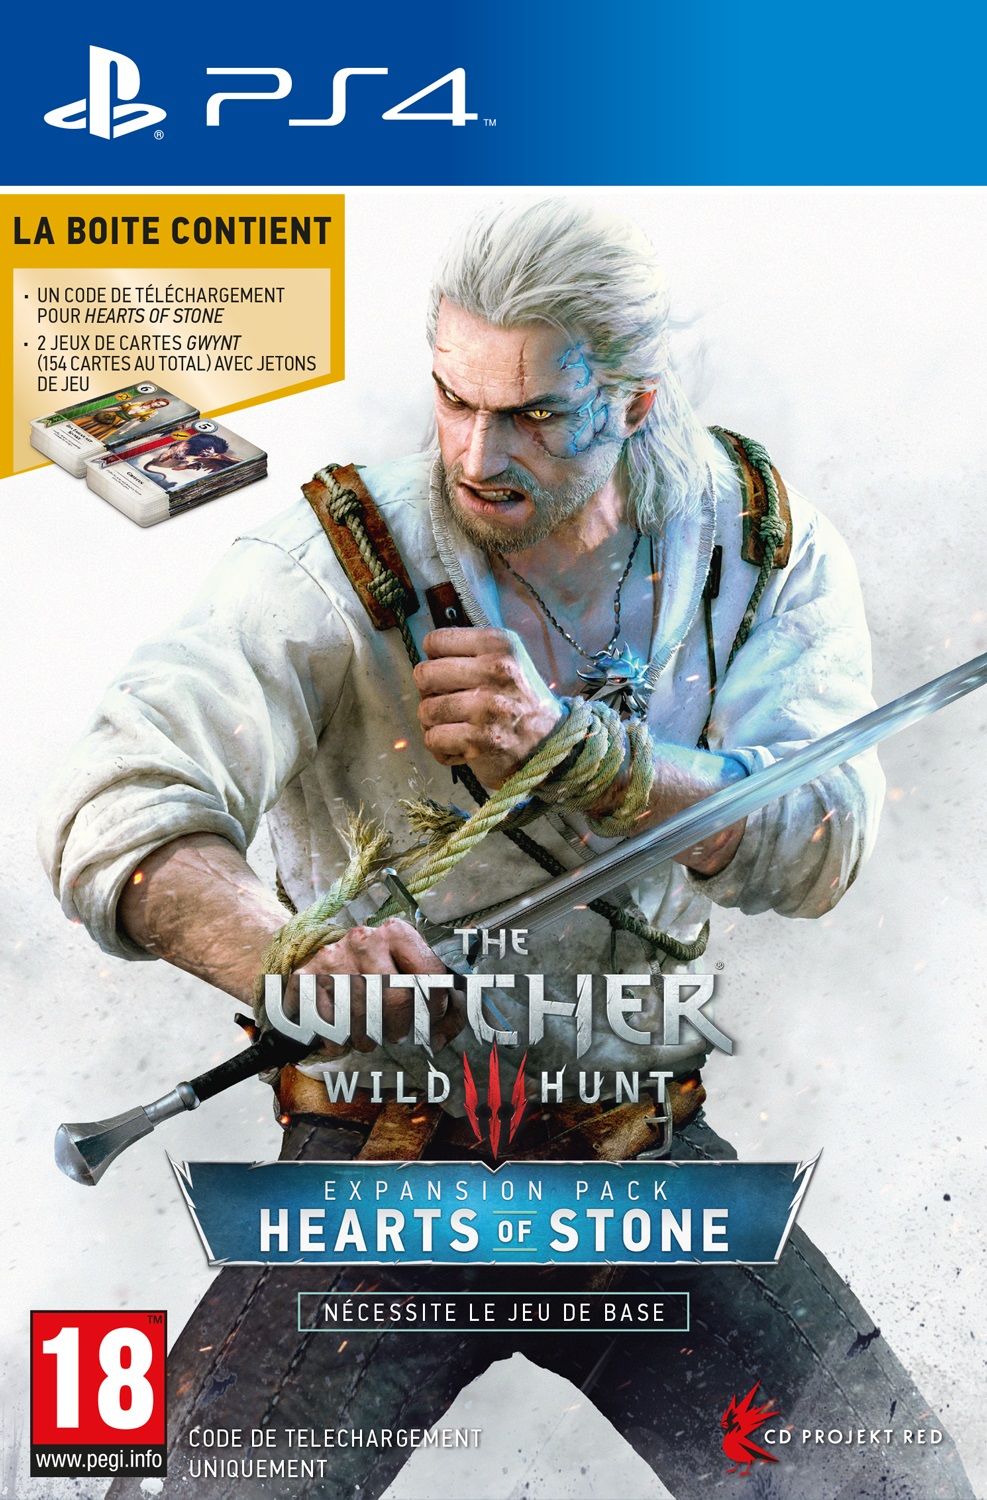 The Witcher 3 : Hearts of Stone Limited Edition Expansion Pack